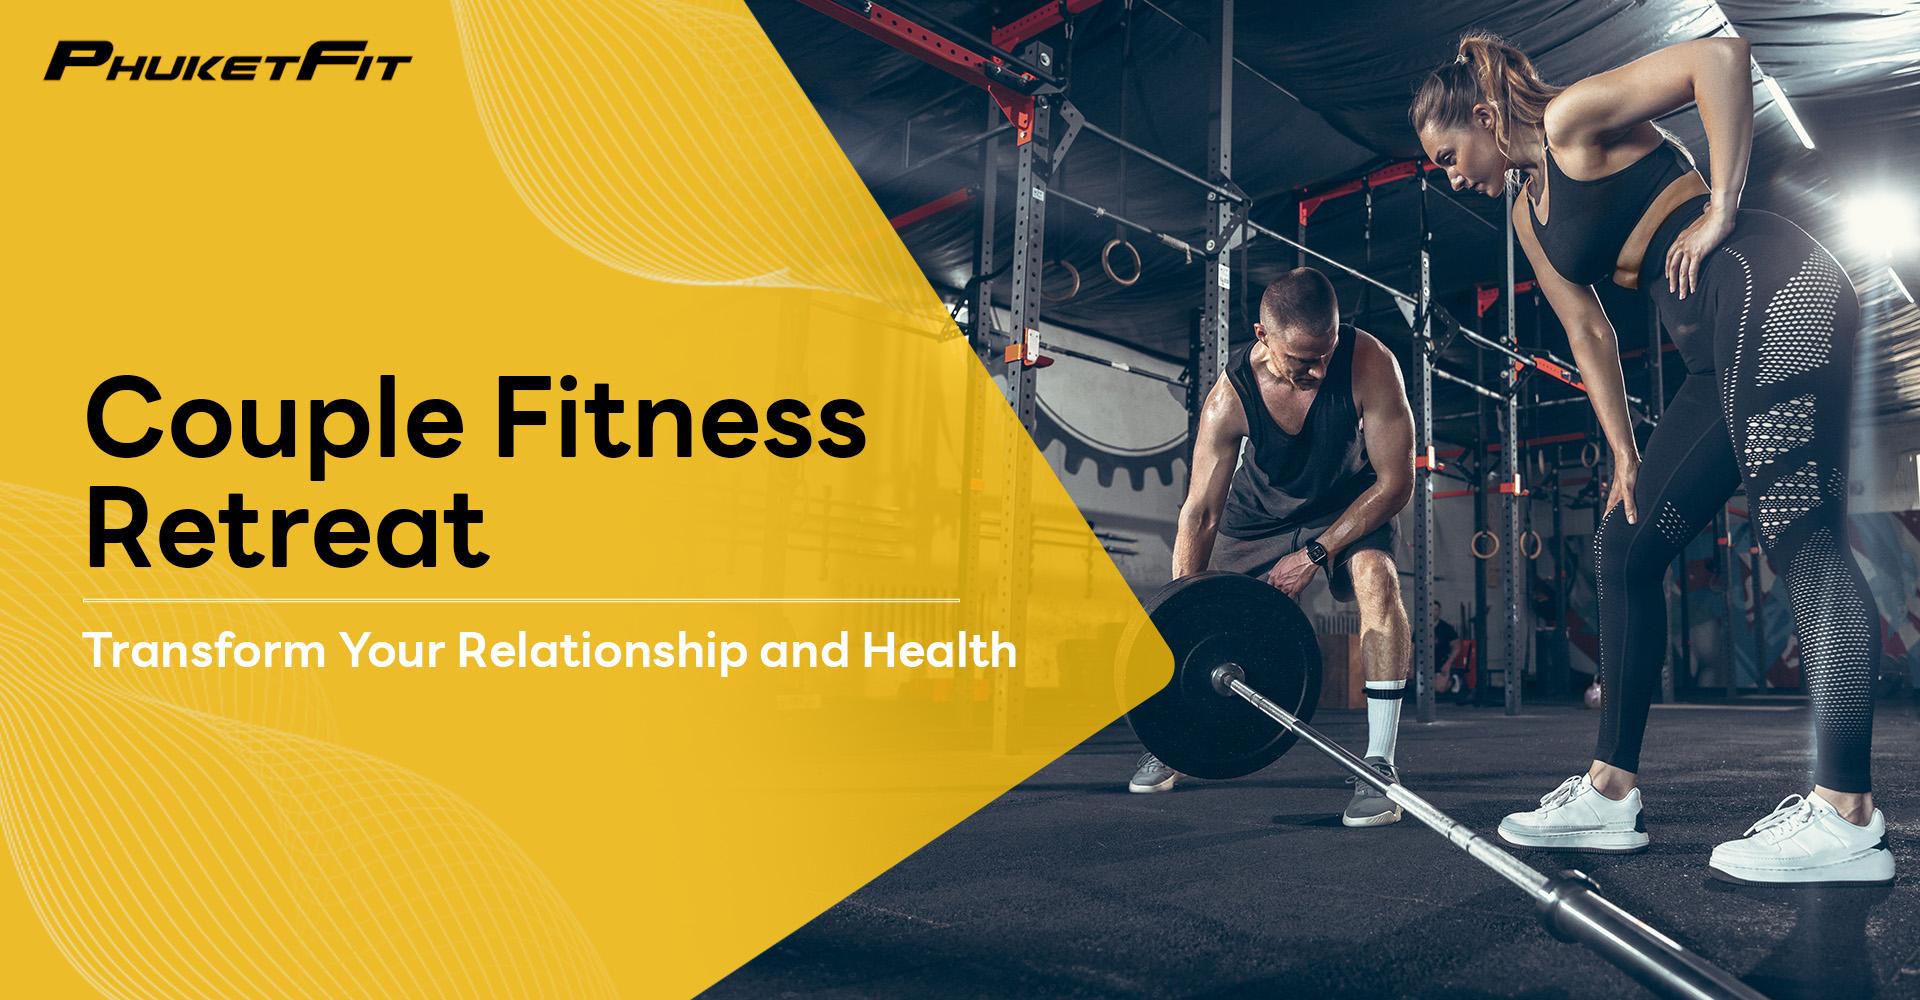 Couple Fitness Retreat Transform Your Relationship and Health